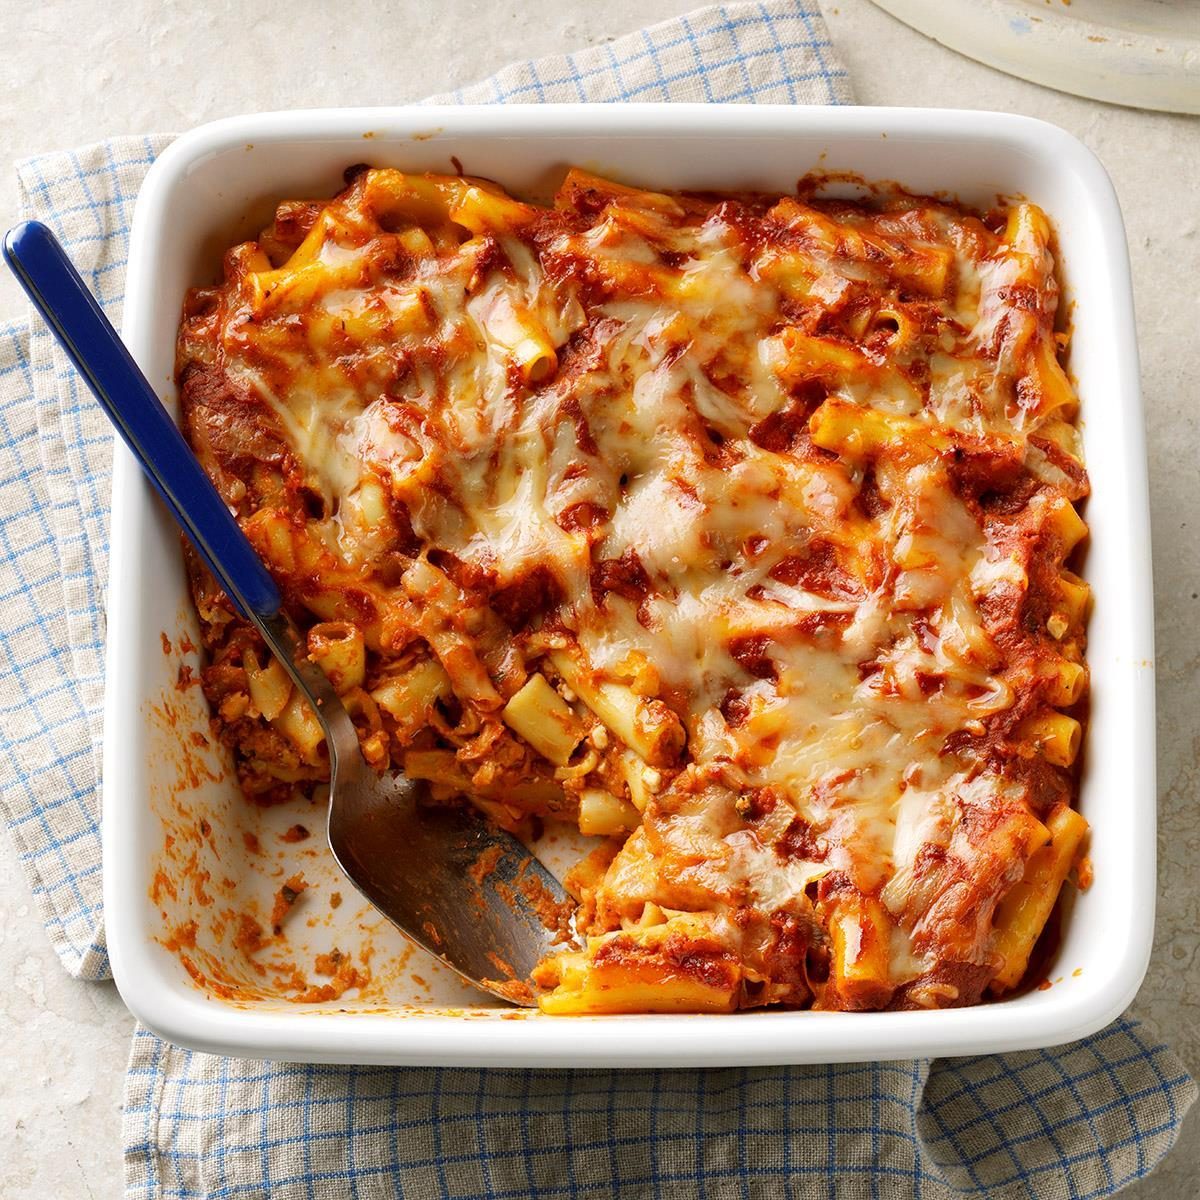 47 Casseroles That Put Your 8x8 Pan to Work | Taste of Home